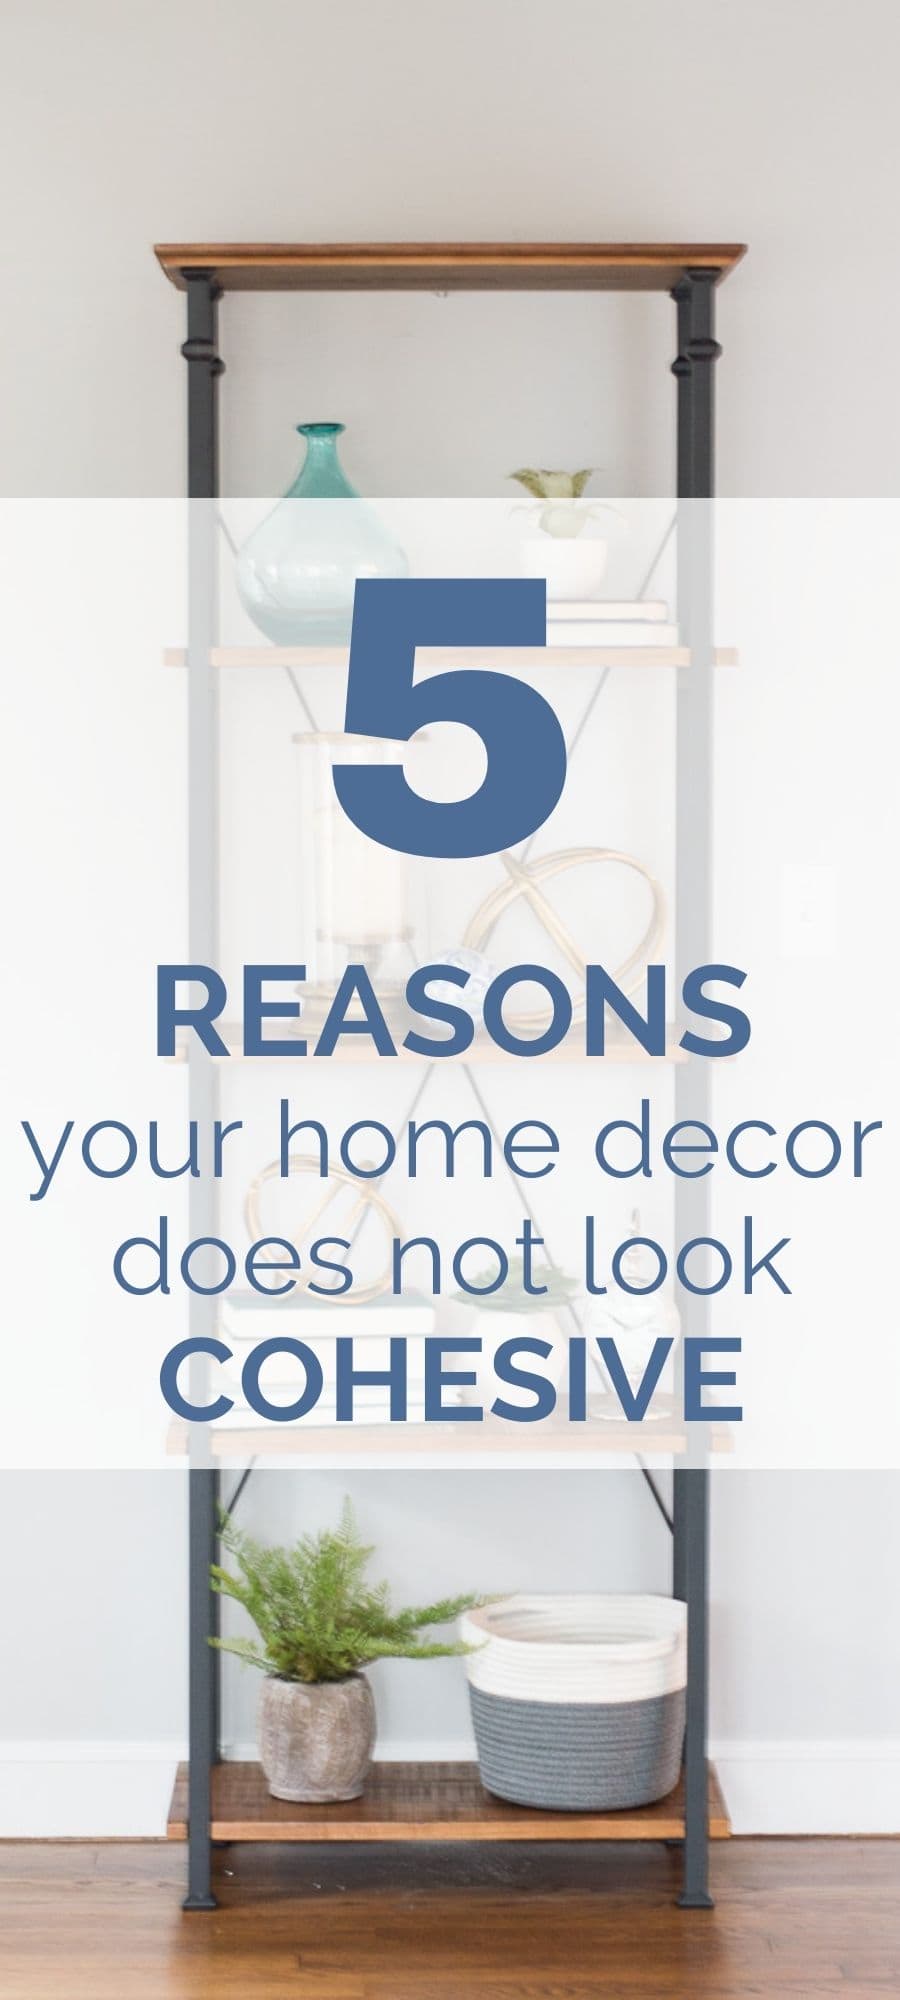 5 reasons your home decor does not look cohesive